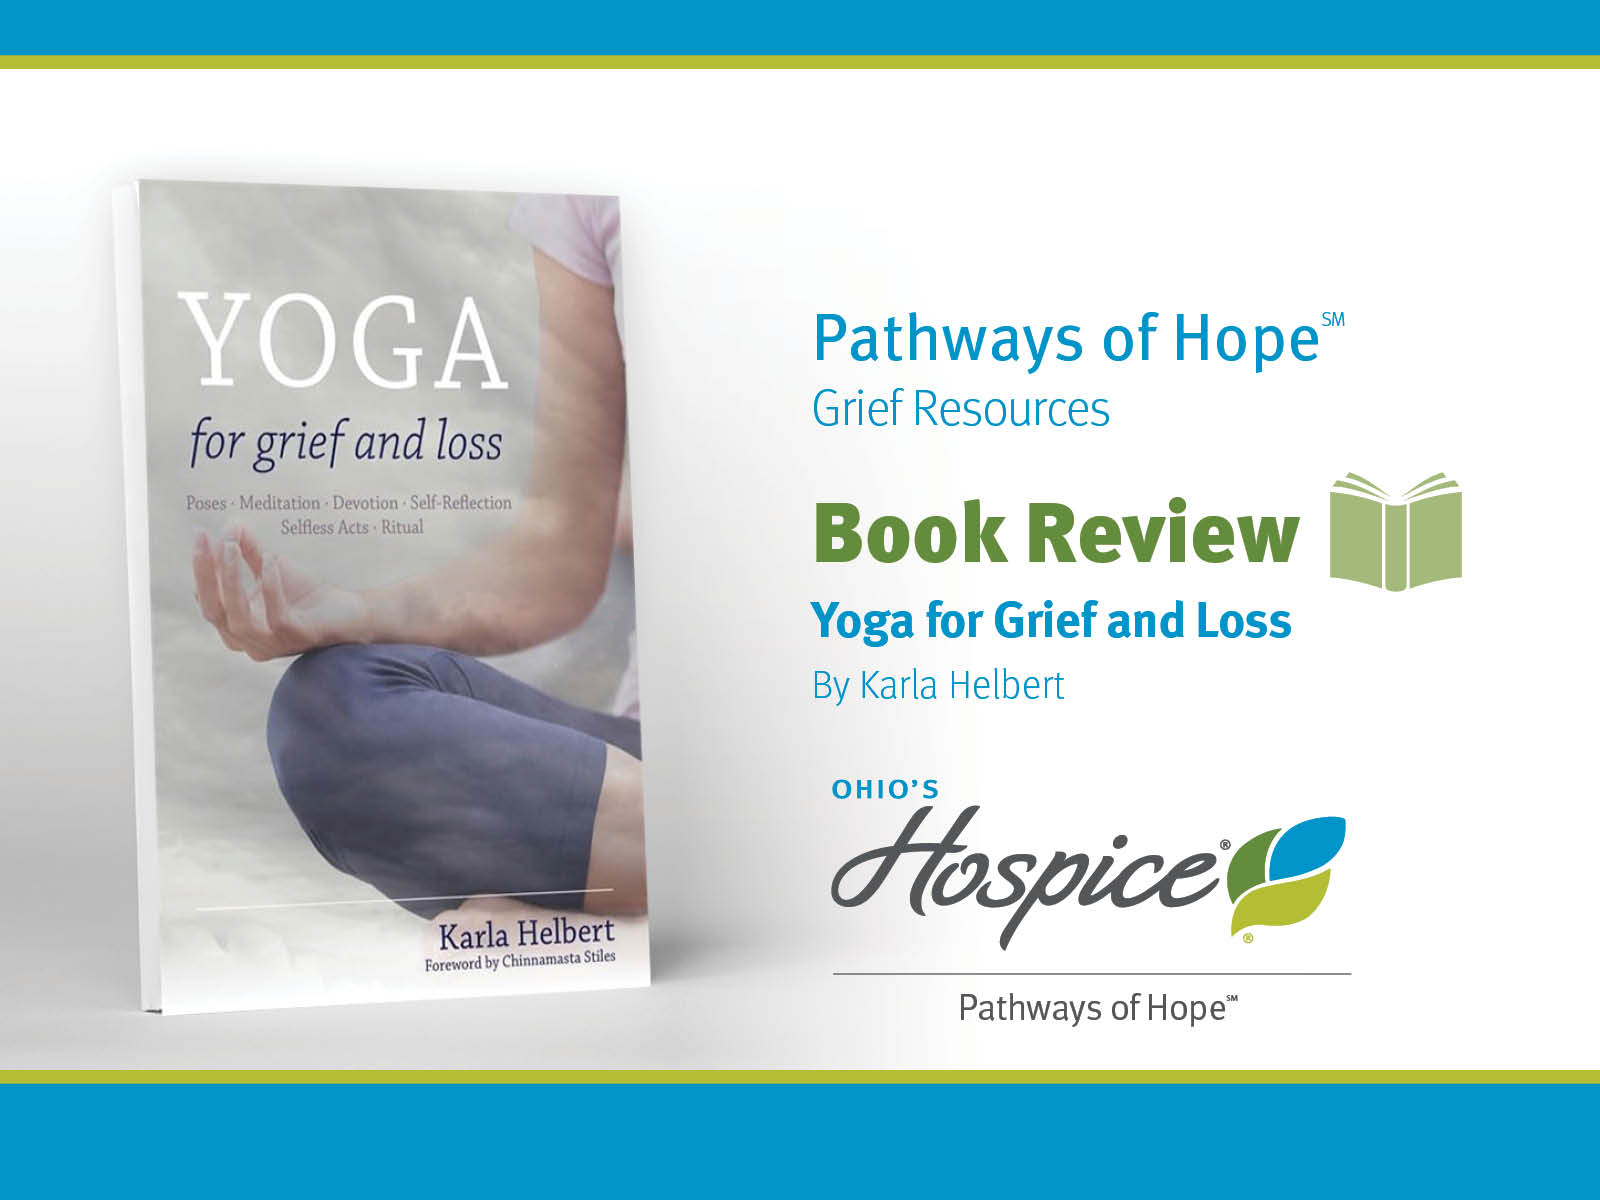 Book Review. Yoga for Grief and Loss. Ohio's Hospice Pathways of Hope